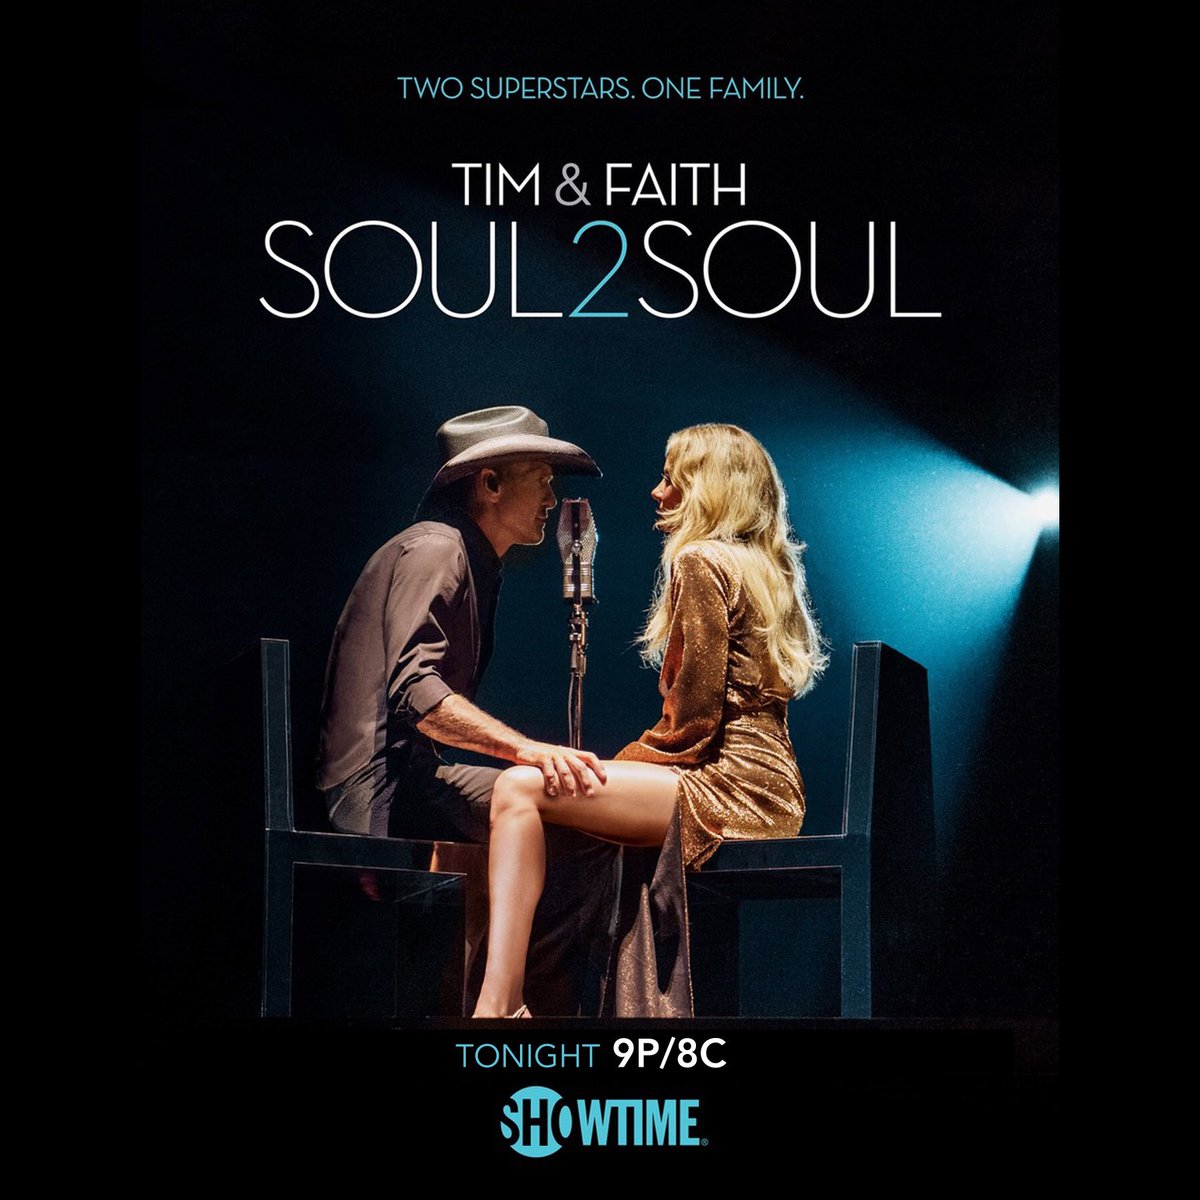 Tonight is the night. Use #SOUL2SOUL + @Showtime to show us your pics if you’re watching! https://t.co/GKdNXqwEDy